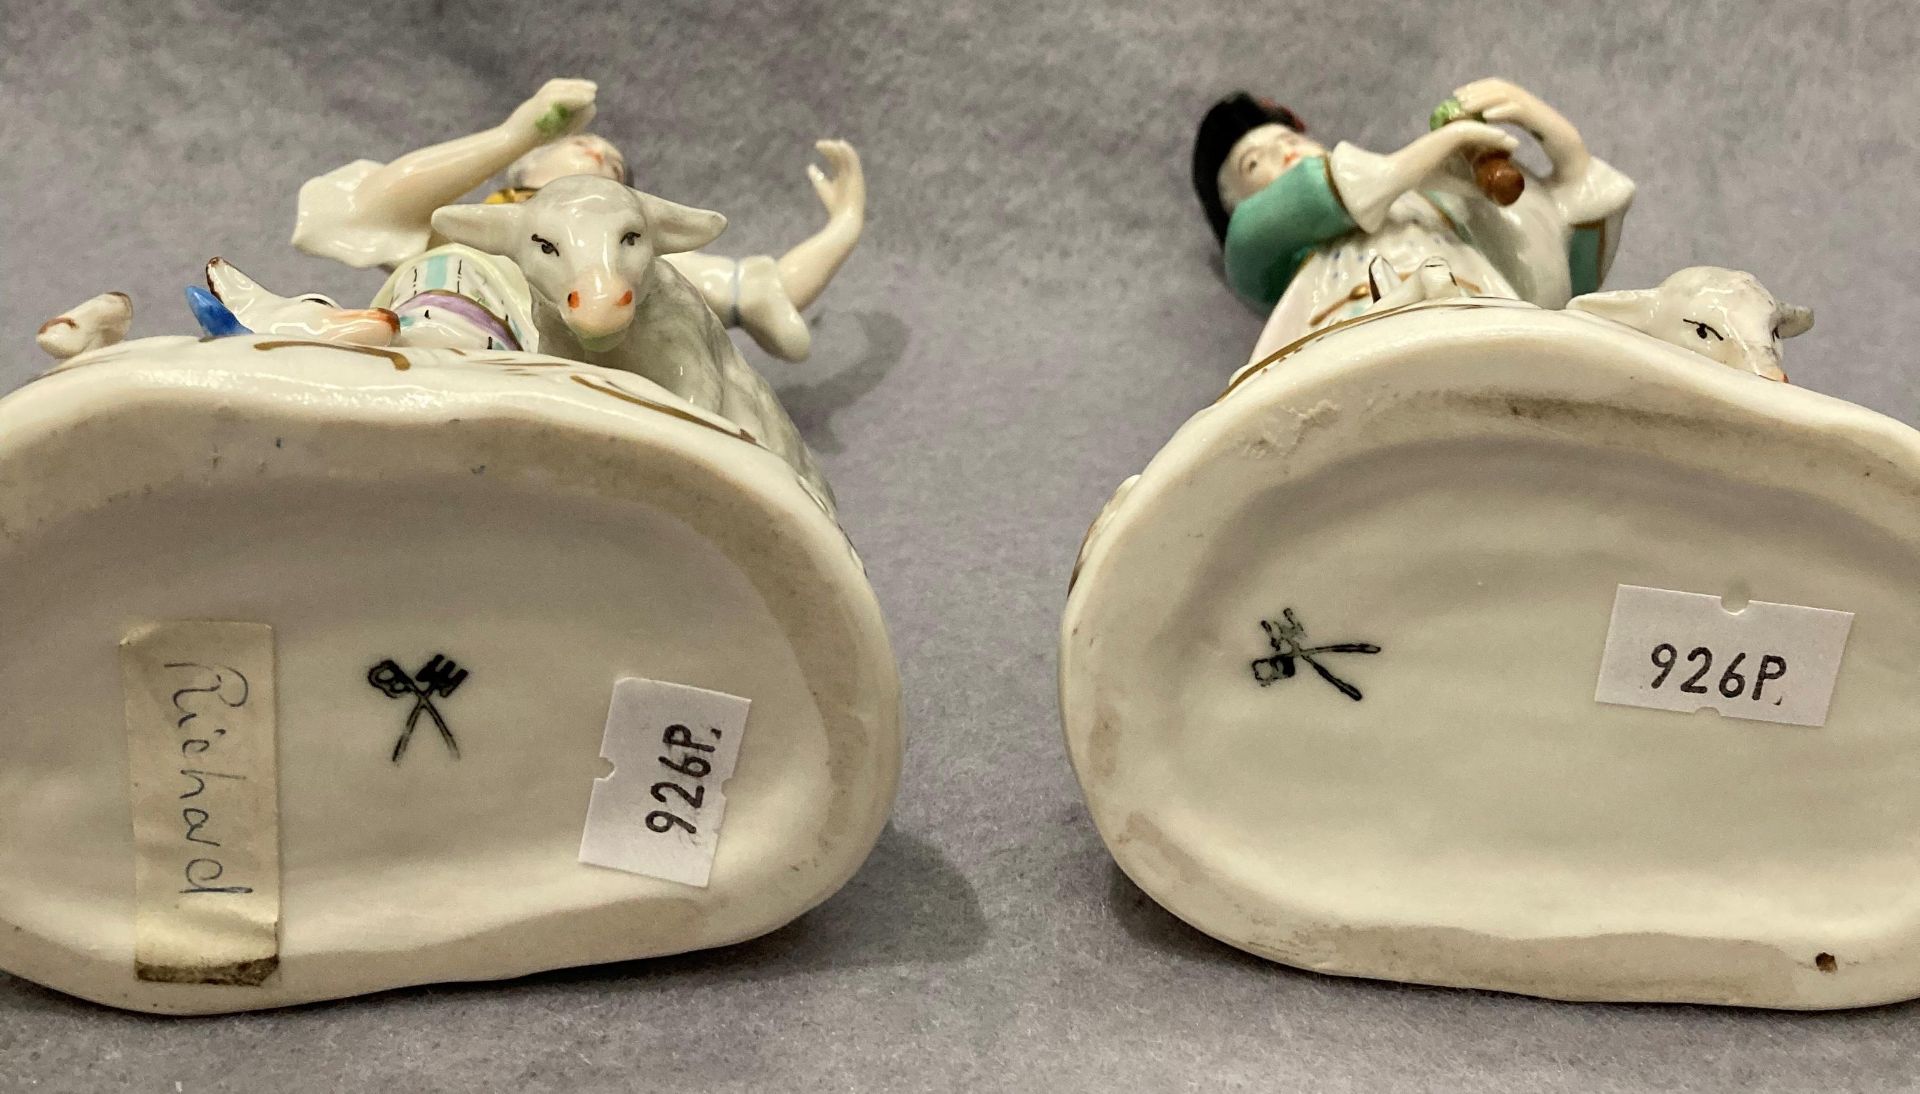 Pair of porcelain figurines, man and woman with animals, damage to the man's animal with bow, - Image 5 of 6